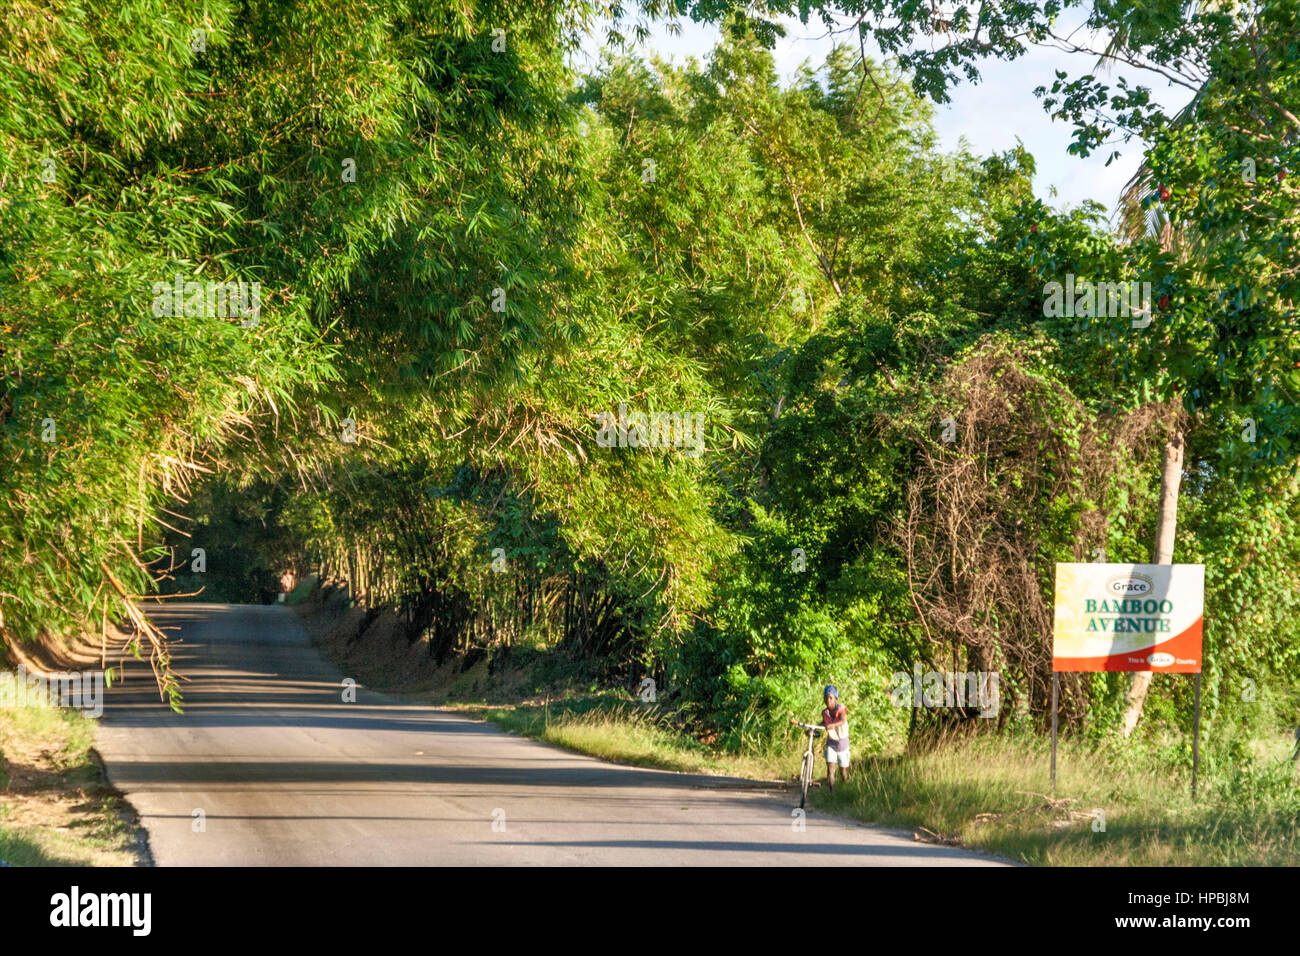 Jamaica St Elisabeth Bamboo Avenue 2 1 2 miles long Bamboo trees overgrowing the road like a tunnel Stock Photo